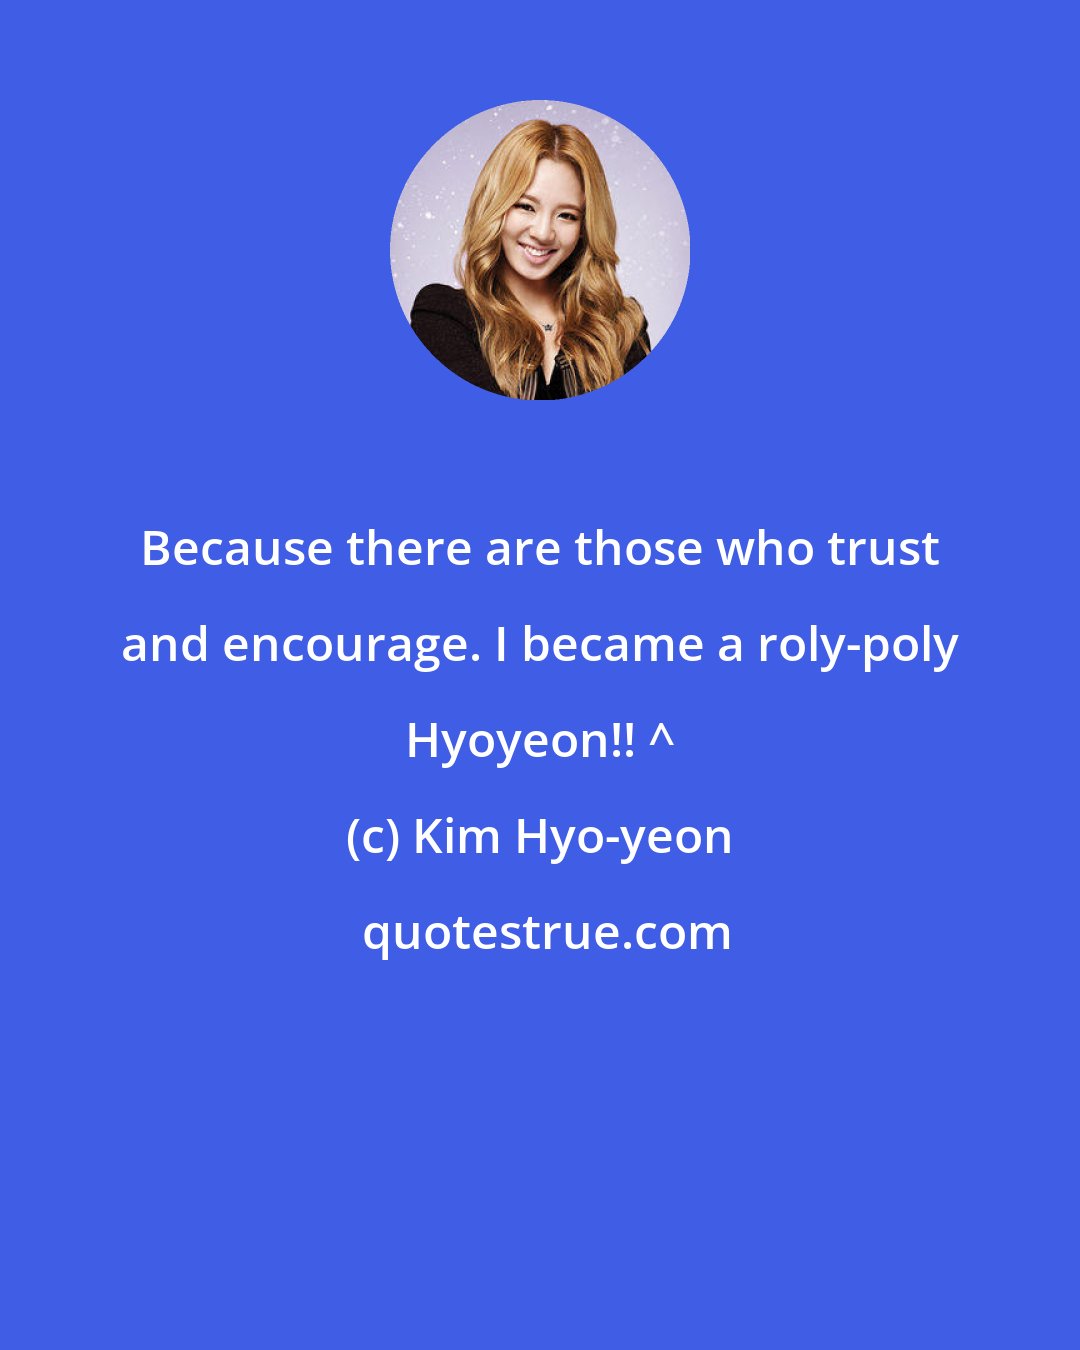 Kim Hyo-yeon: Because there are those who trust and encourage. I became a roly-poly Hyoyeon!! ^^